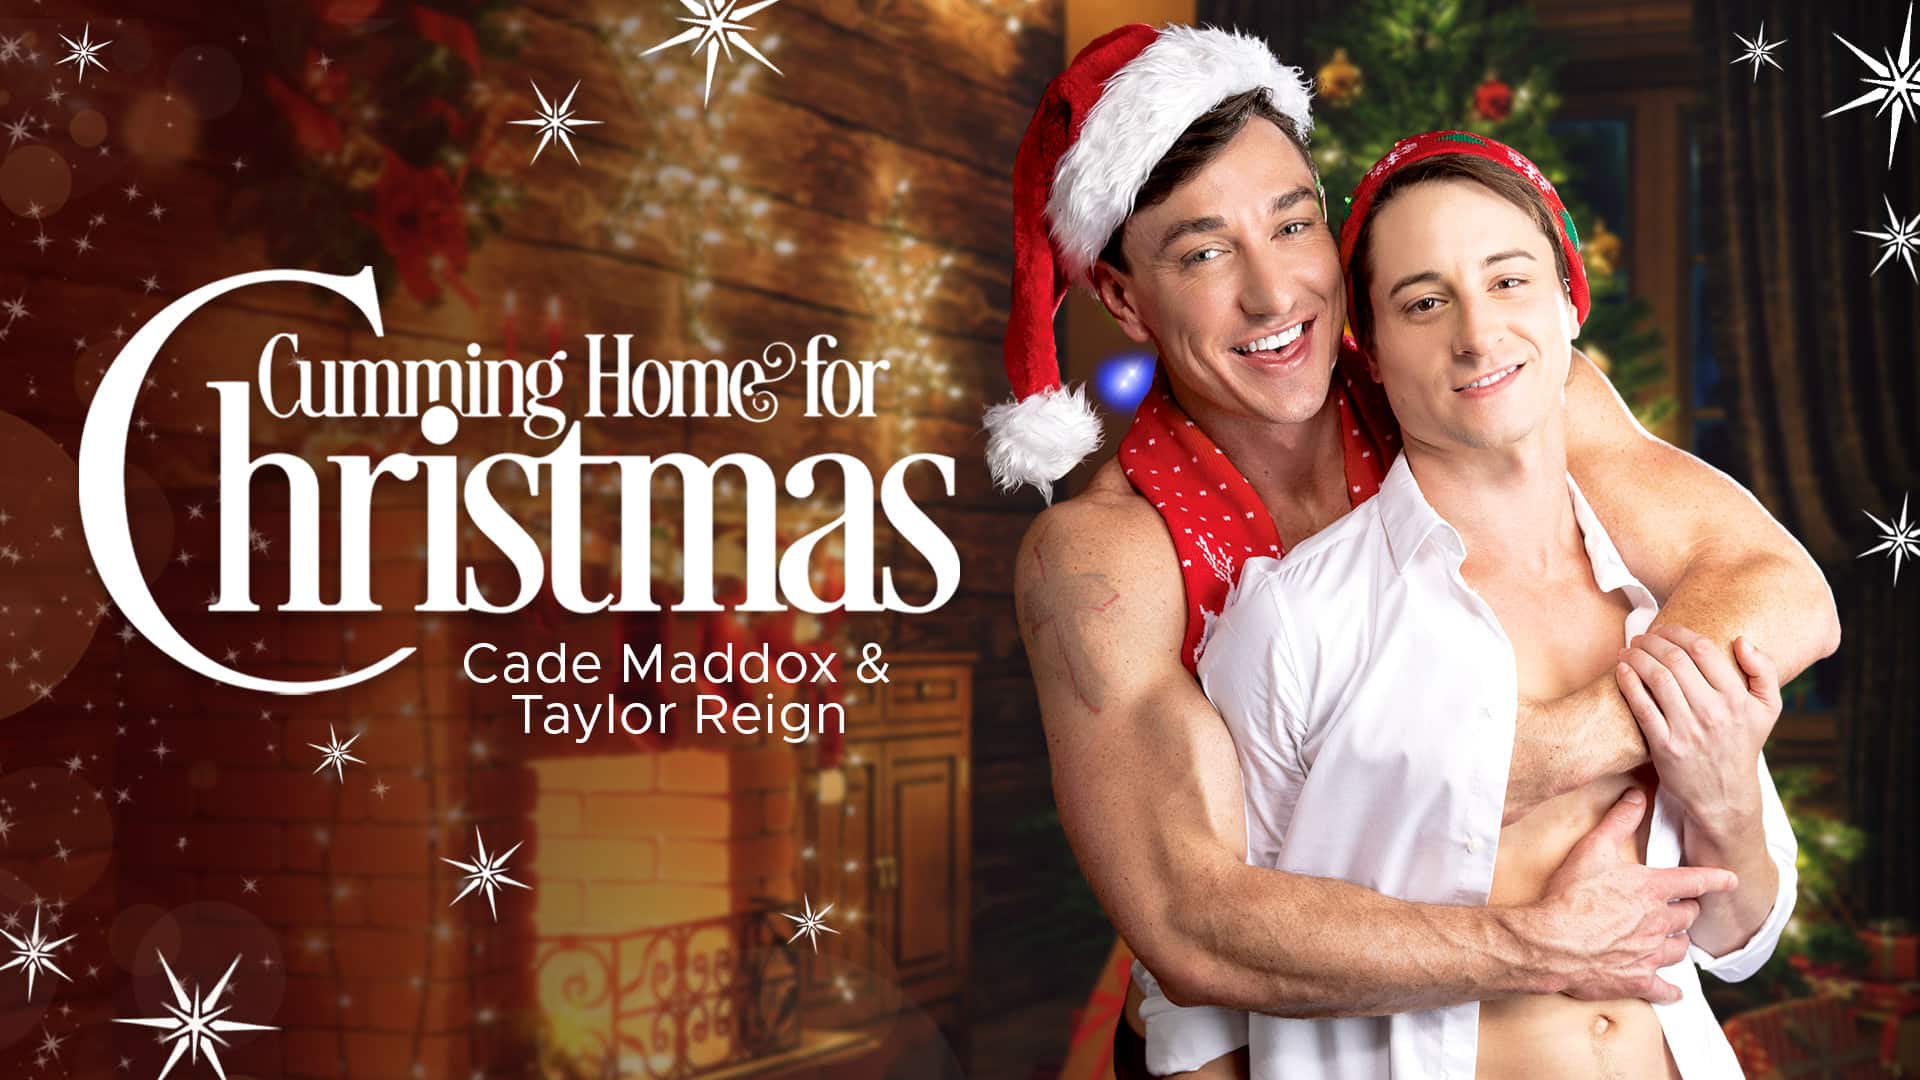 Cumming Home For Christmas – Cade Maddox and Taylor Reign